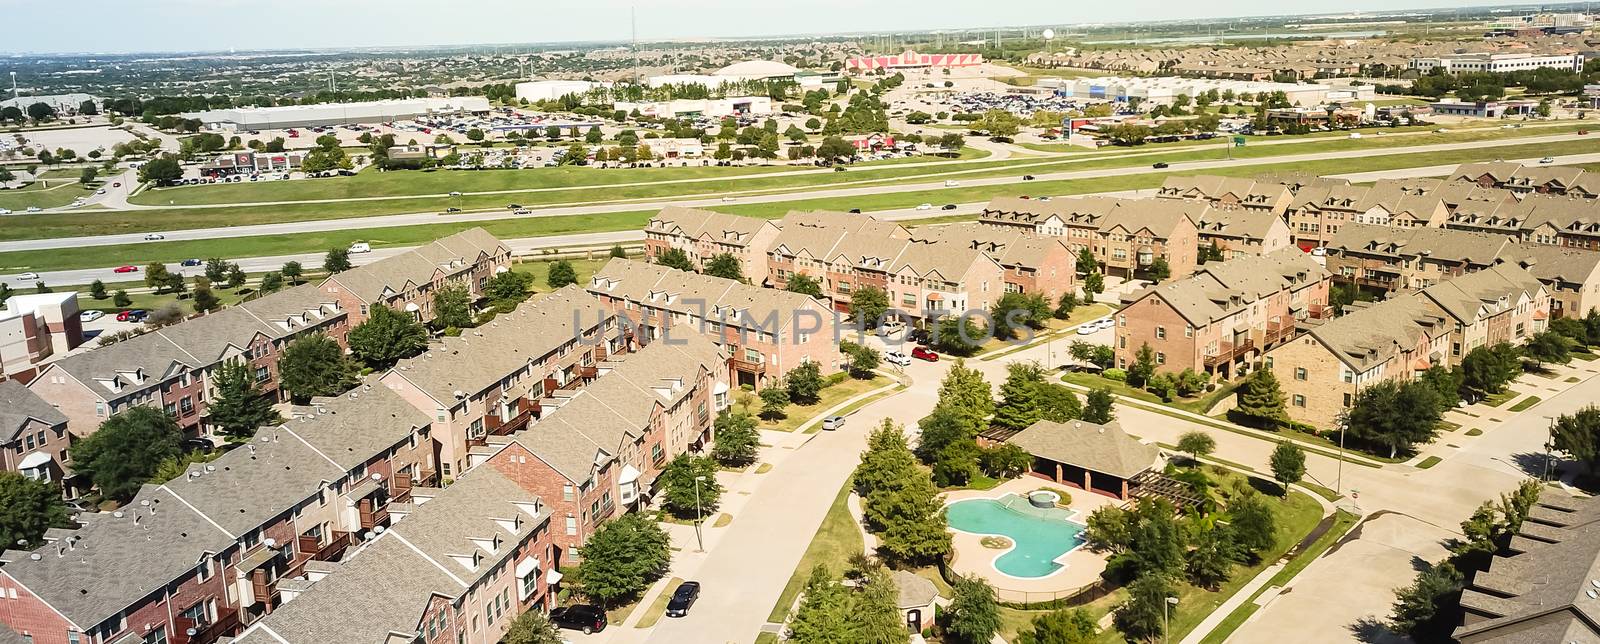 Aerial view apartment building complex with swimming pool near interstate 635 freeway in suburban Dallas, Texas, USA. Opposite are large retail stores and shopping, restaurant destinations